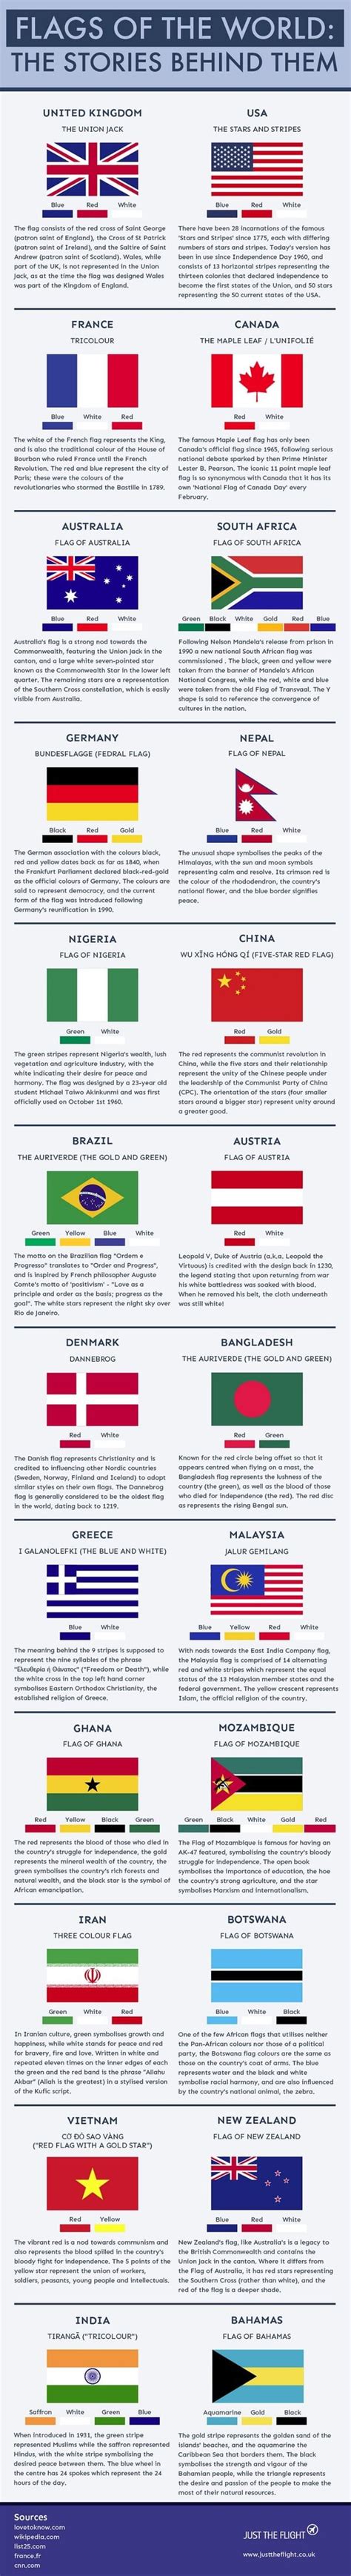 24 Flags Of The World And The Stories Behind Them